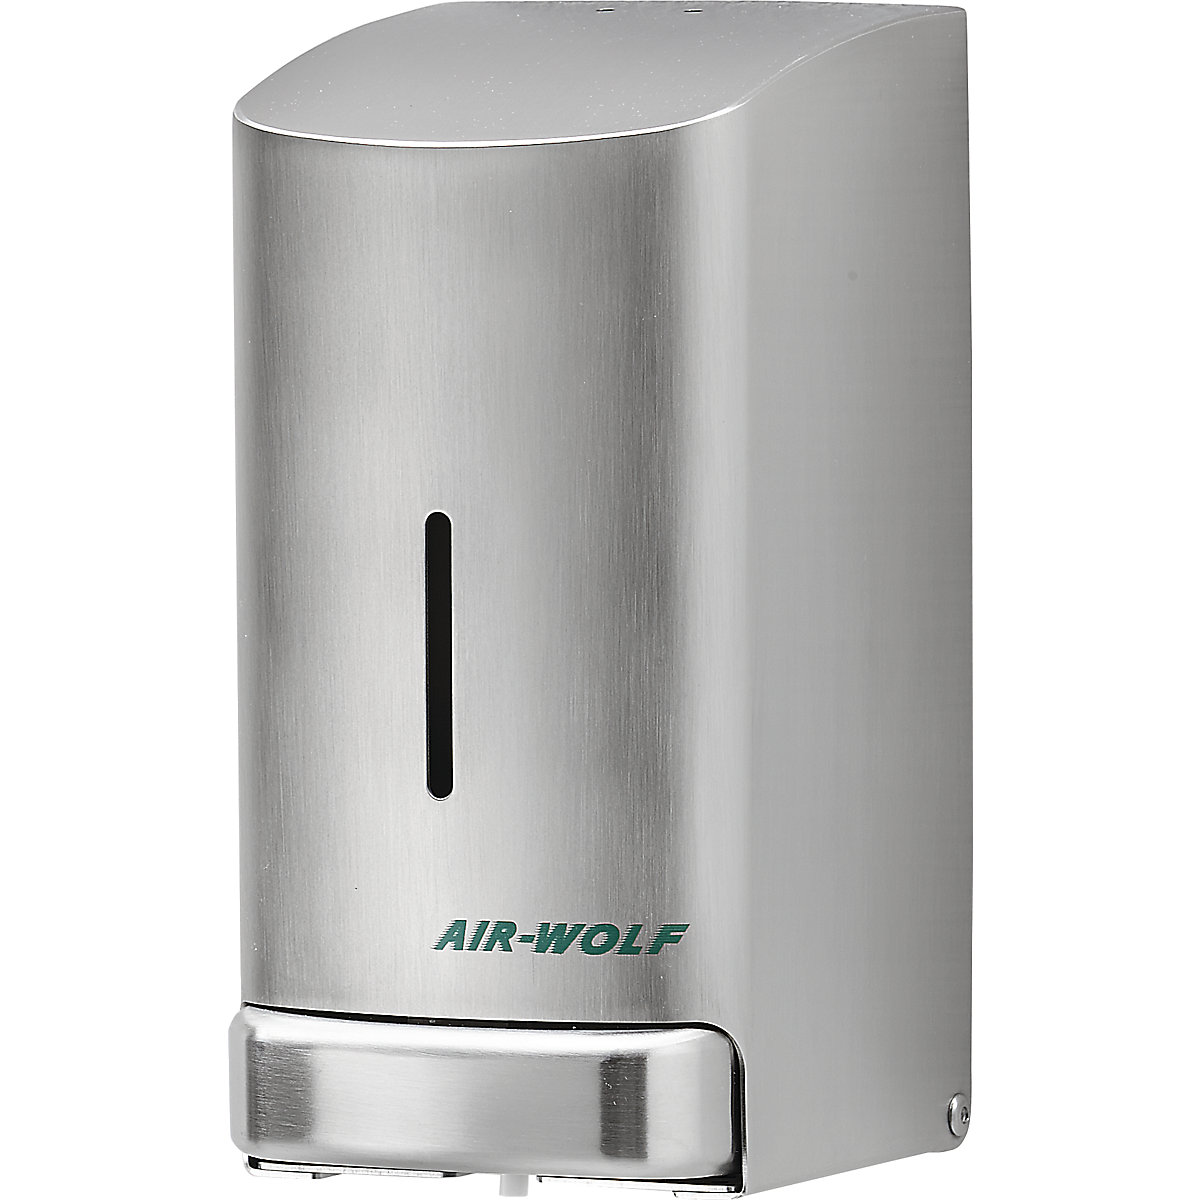 Stainless steel soap dispenser – AIR-WOLF, capacity 0.8 l, stainless steel, brushed-2